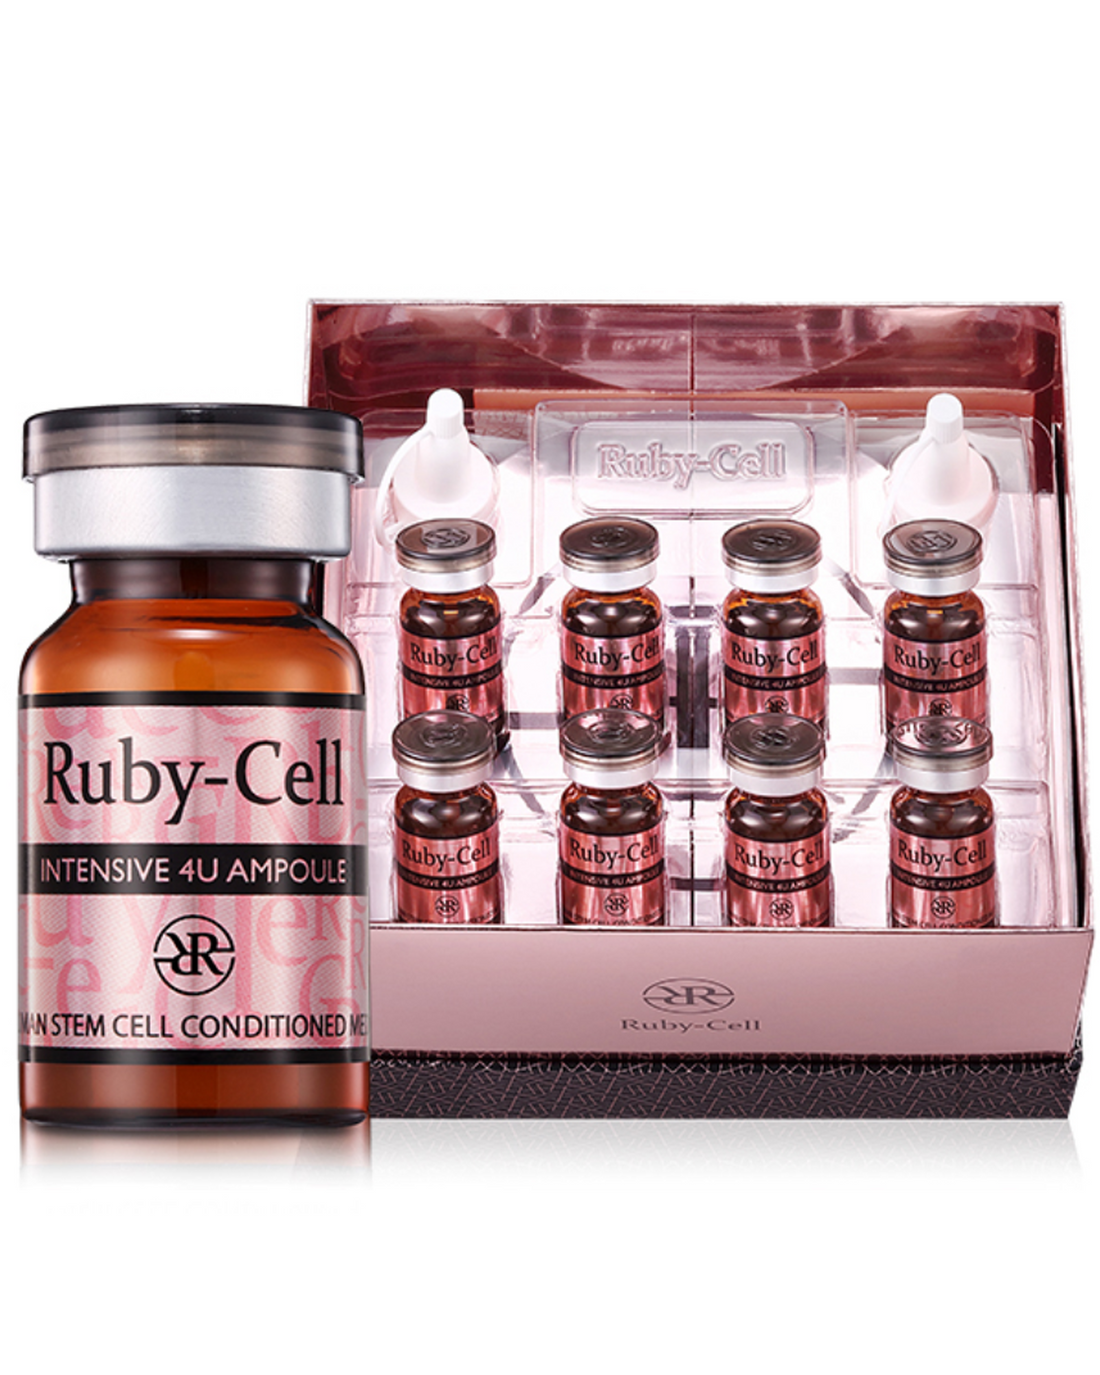 Ampoule Intensive Ruby-Cell 4U